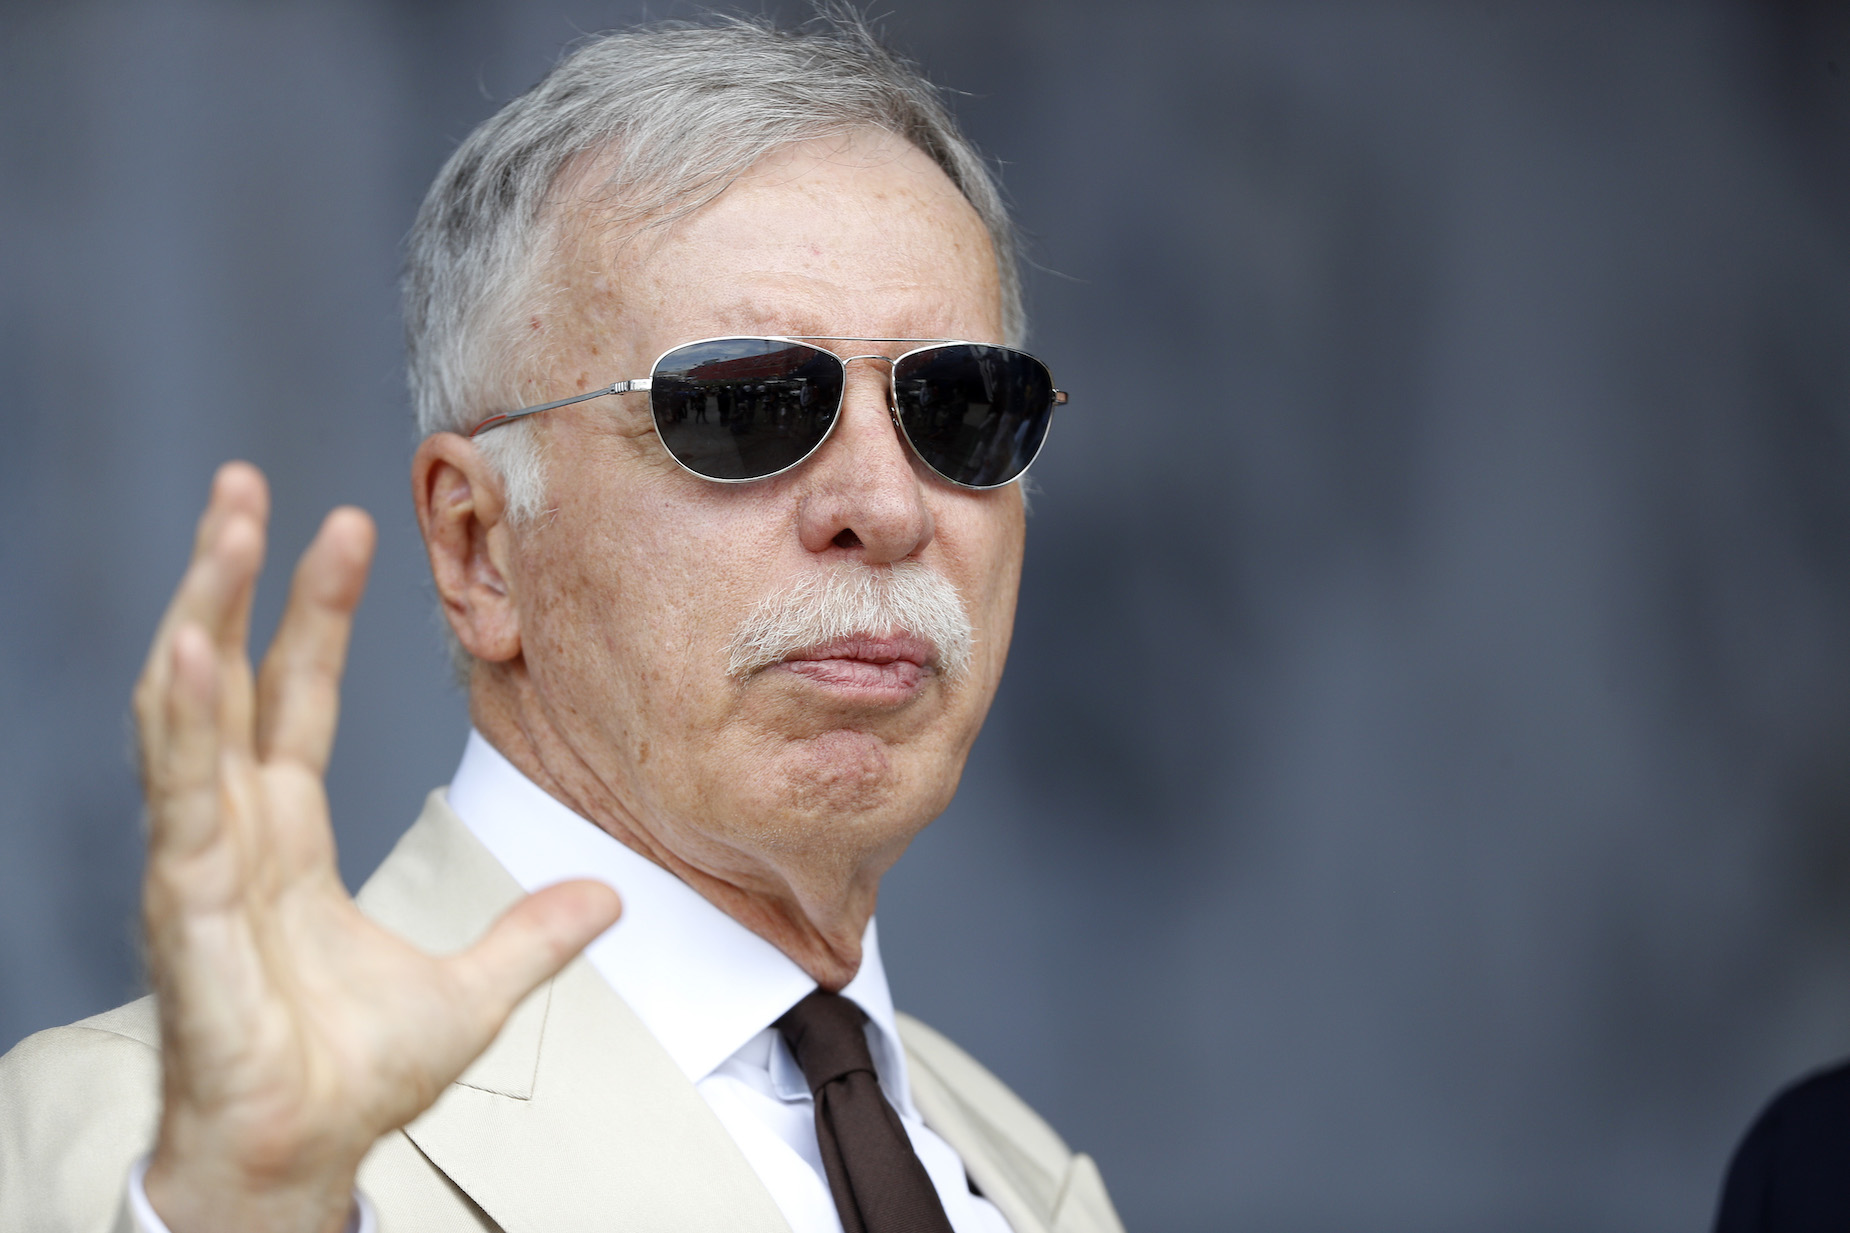 Stan Kroenke is rich, but he's also unpopular on both sides of the Atlantic.